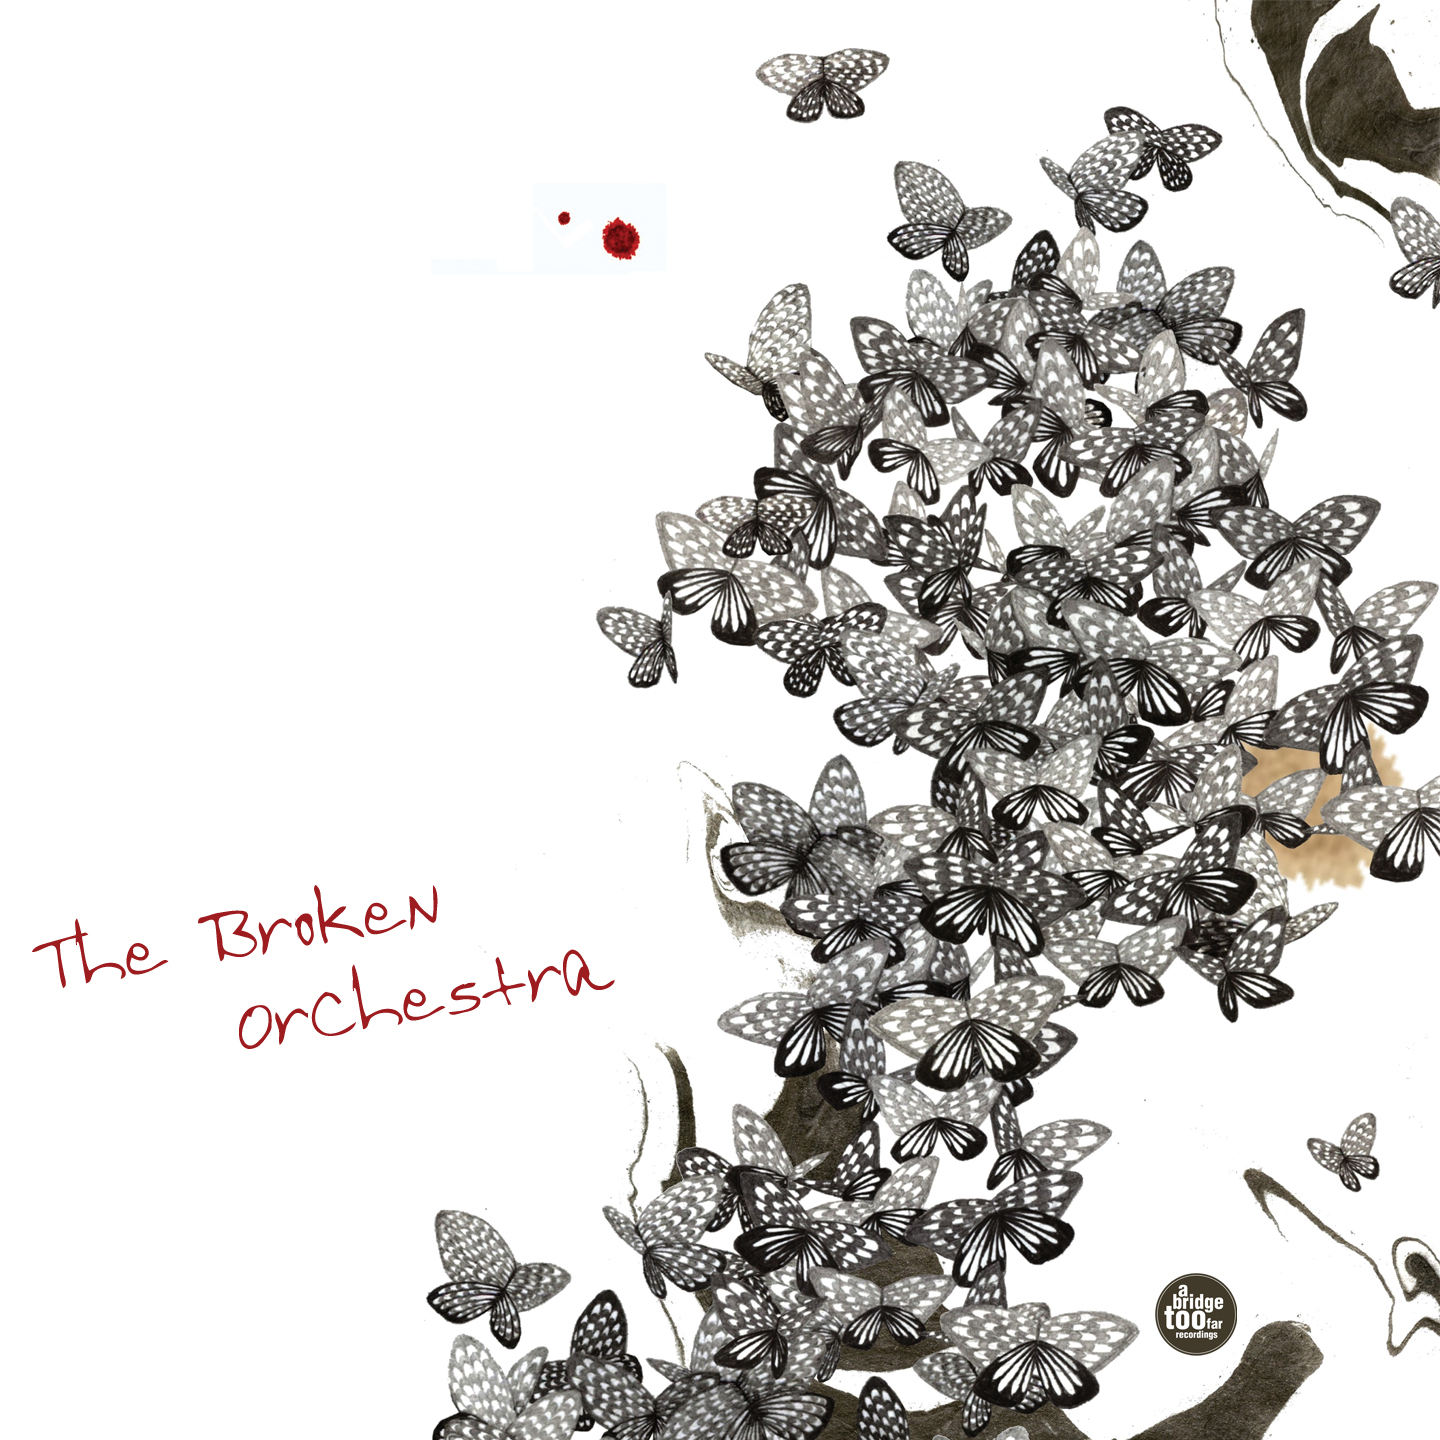 Pick Of The Week #25: The Broken Orchestra